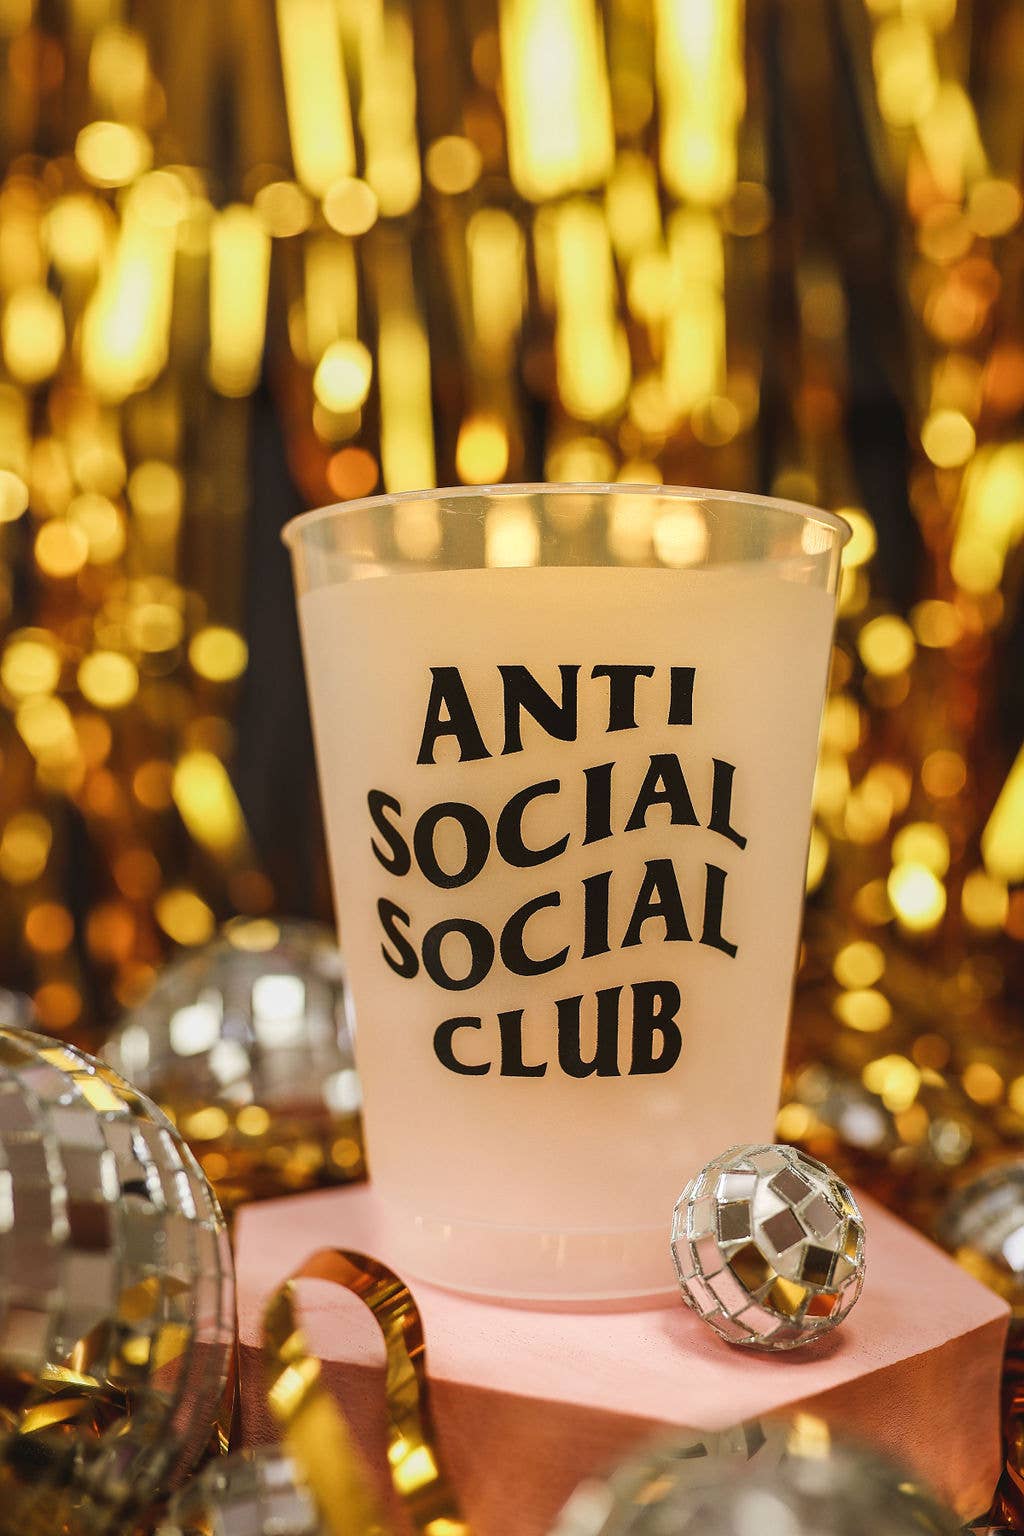 Anti Social Club Roadie Frosted Cups: Pack of 6